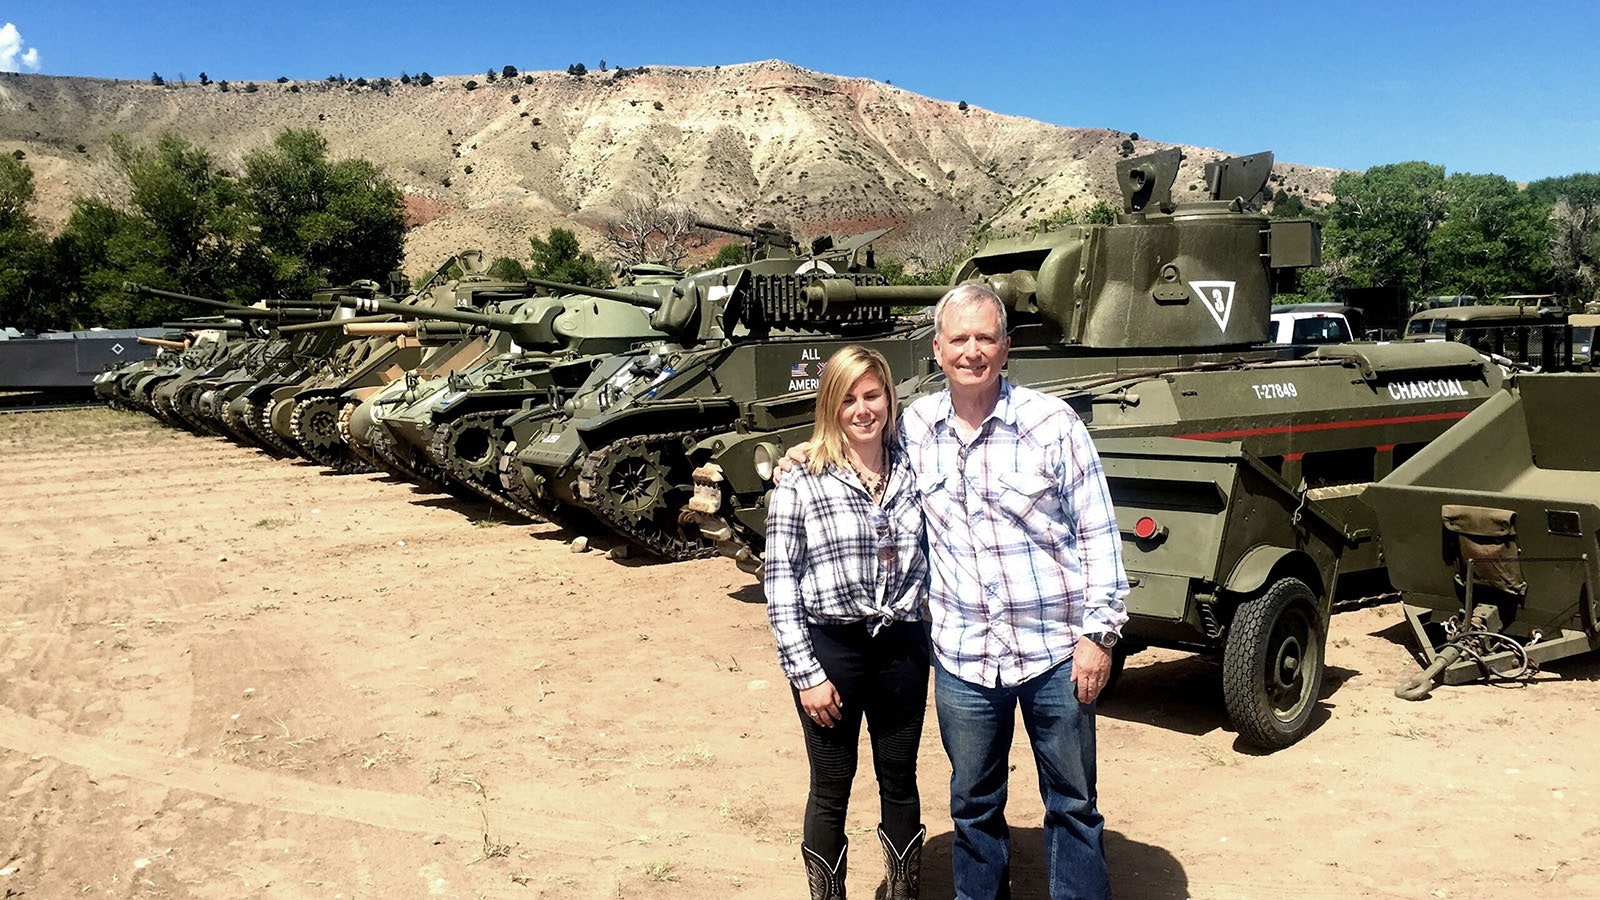 Dan Starks is the founder of the National Museum of Military Vehicles in Dubois, Wyoming.